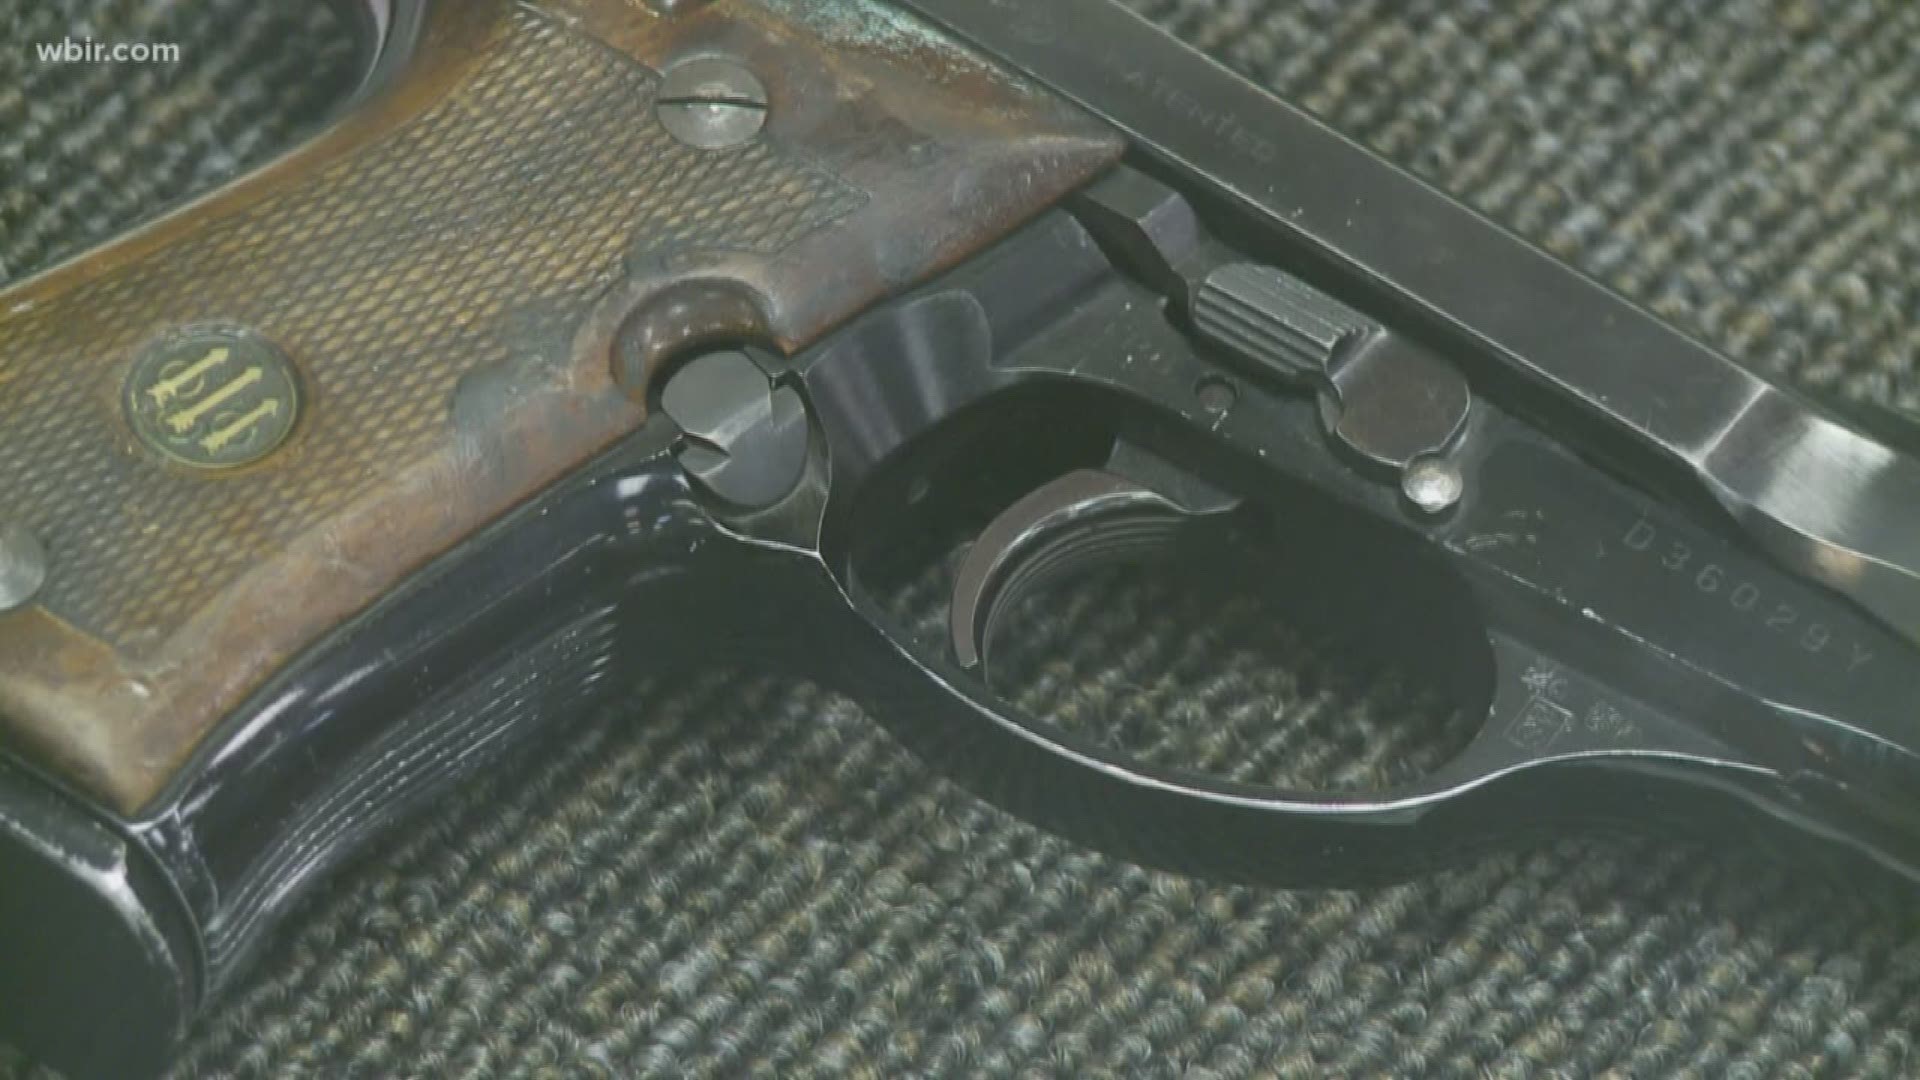 Starting Jan. 1, there will be a new "concealed only" permit.